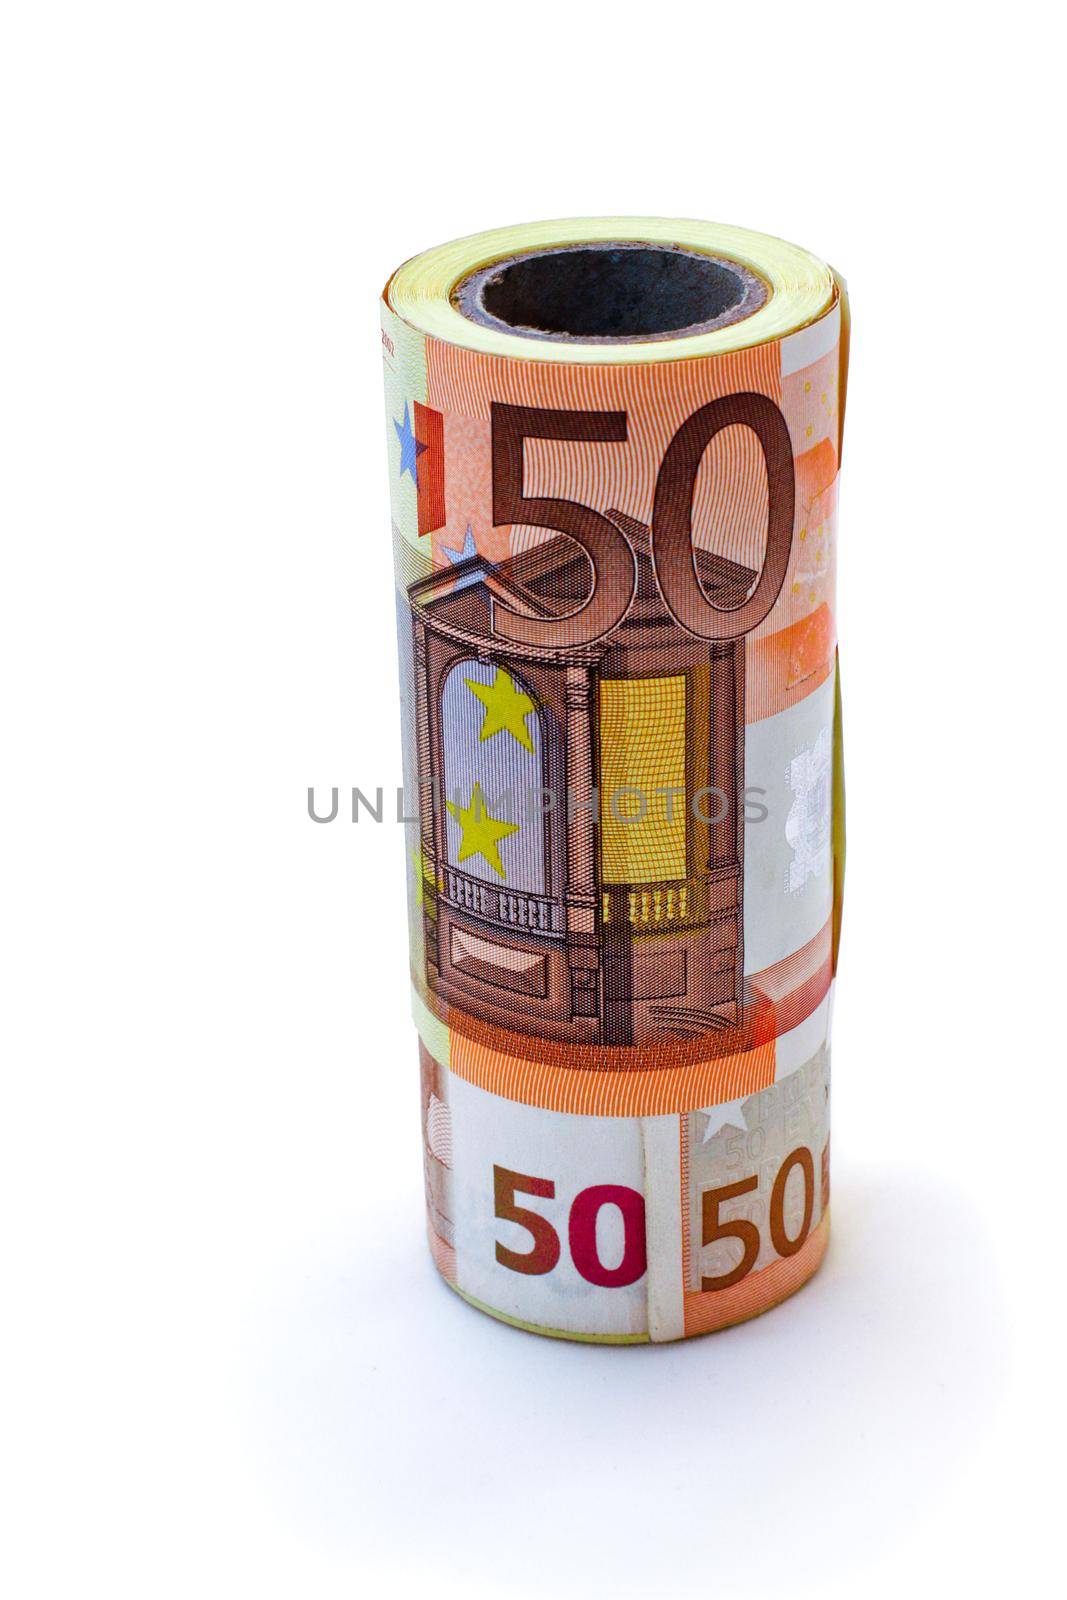 monetary denominations advantage 50 euros, on a white background by client111